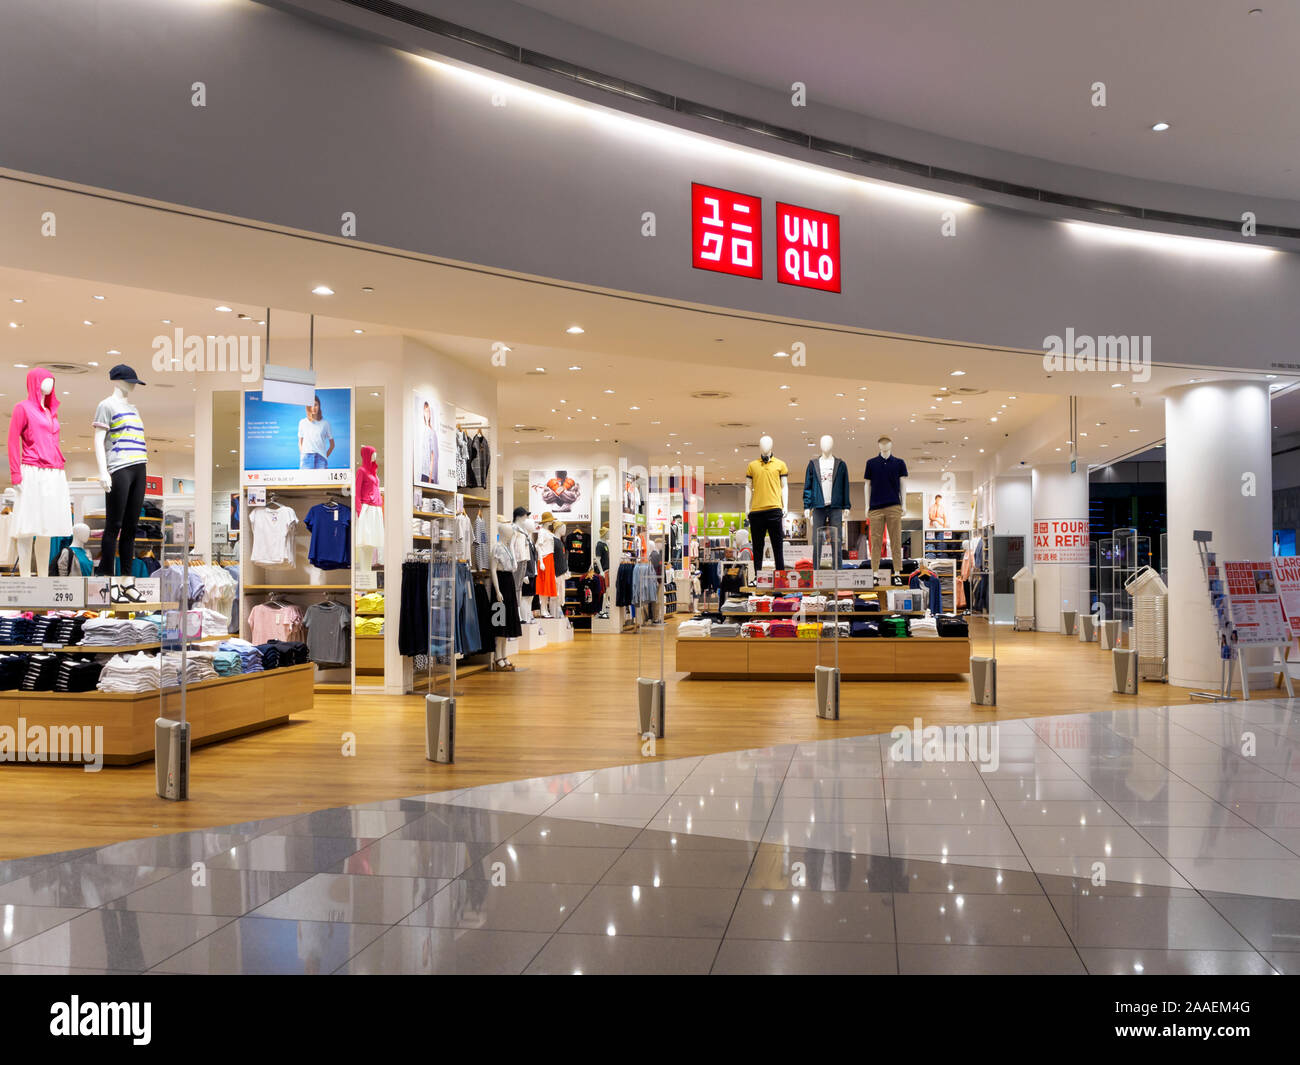 SINGAPORE - 6 MAY 2019 - Frontage of a Uniqlo clothing retail outlet at  Suntec City Mall, Singapore Stock Photo - Alamy